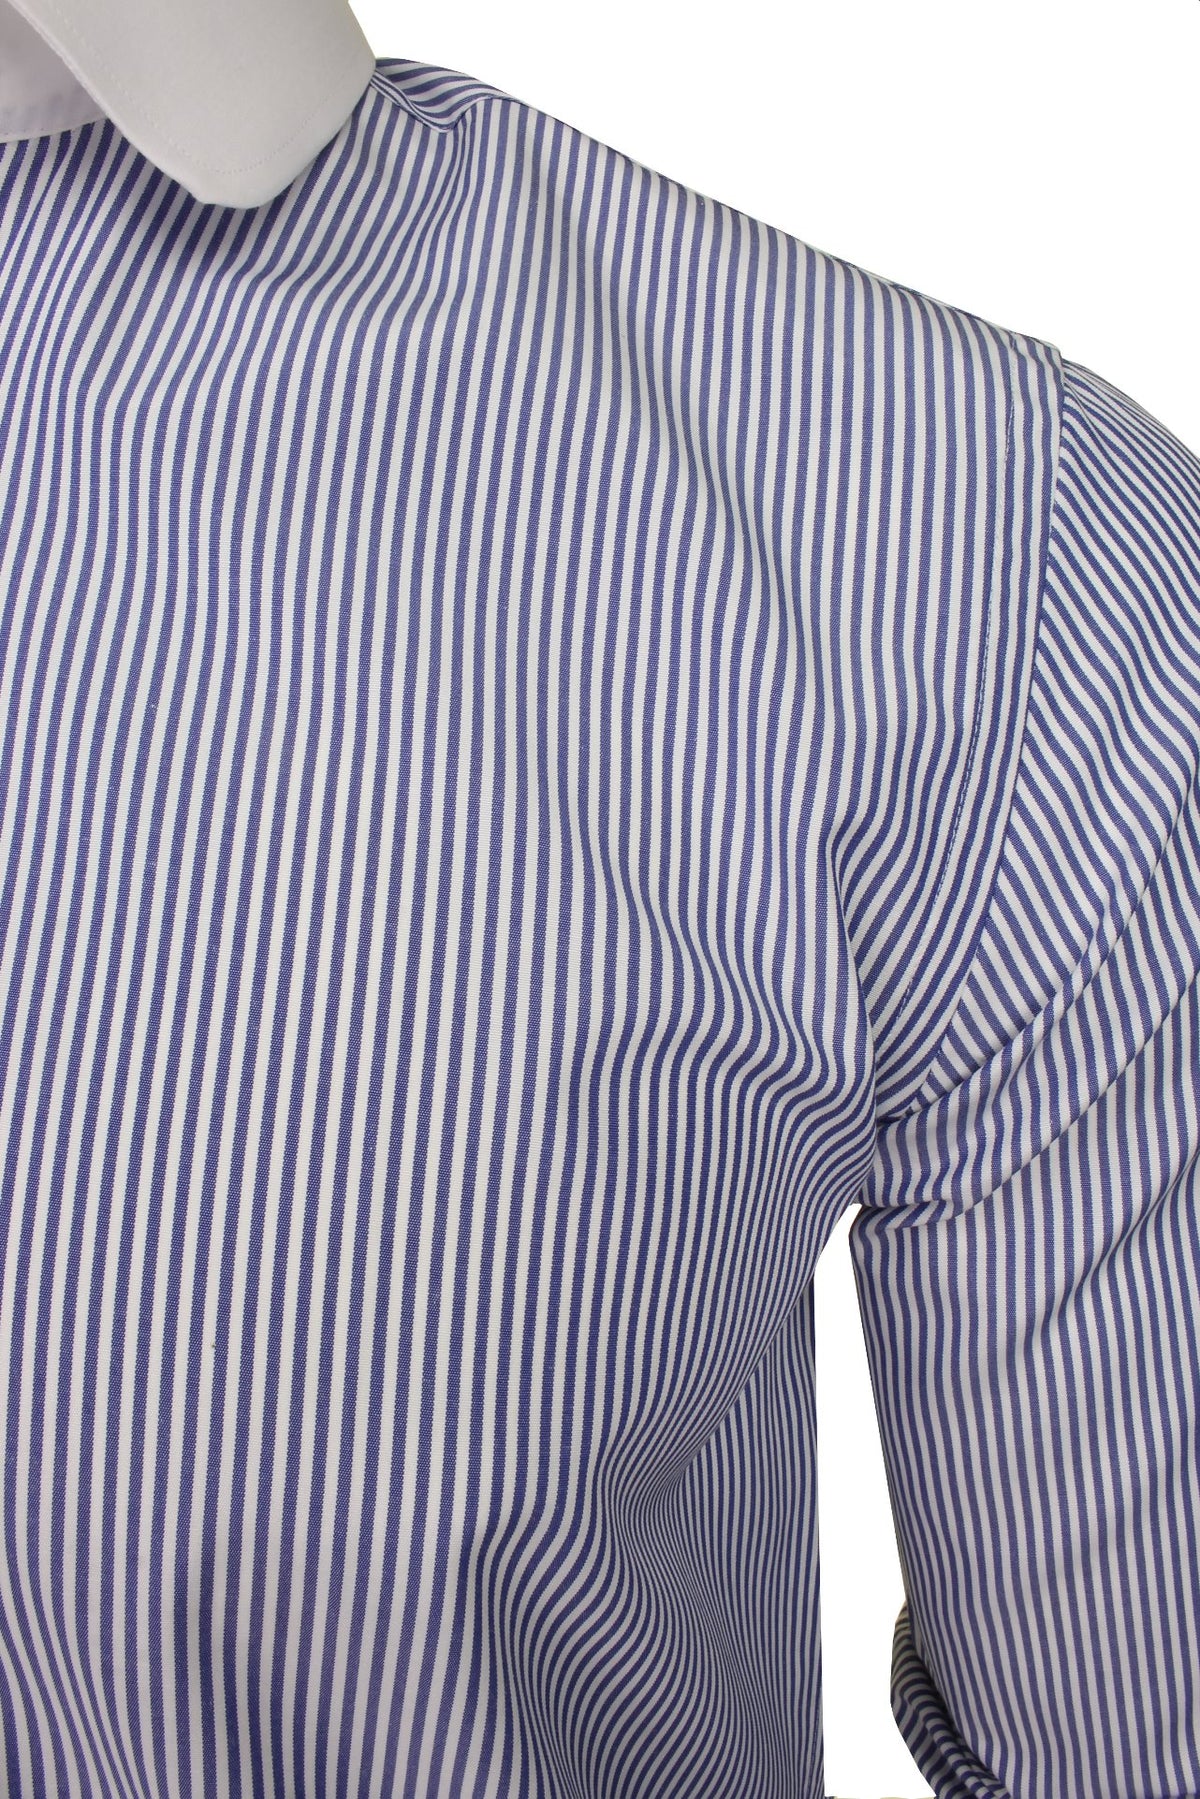 Xact Men's Long-Sleeved Striped Shirt with White Penny/Club Collar and White Cuffs, 02, Xsh1092, White Collar - Blue Stripe